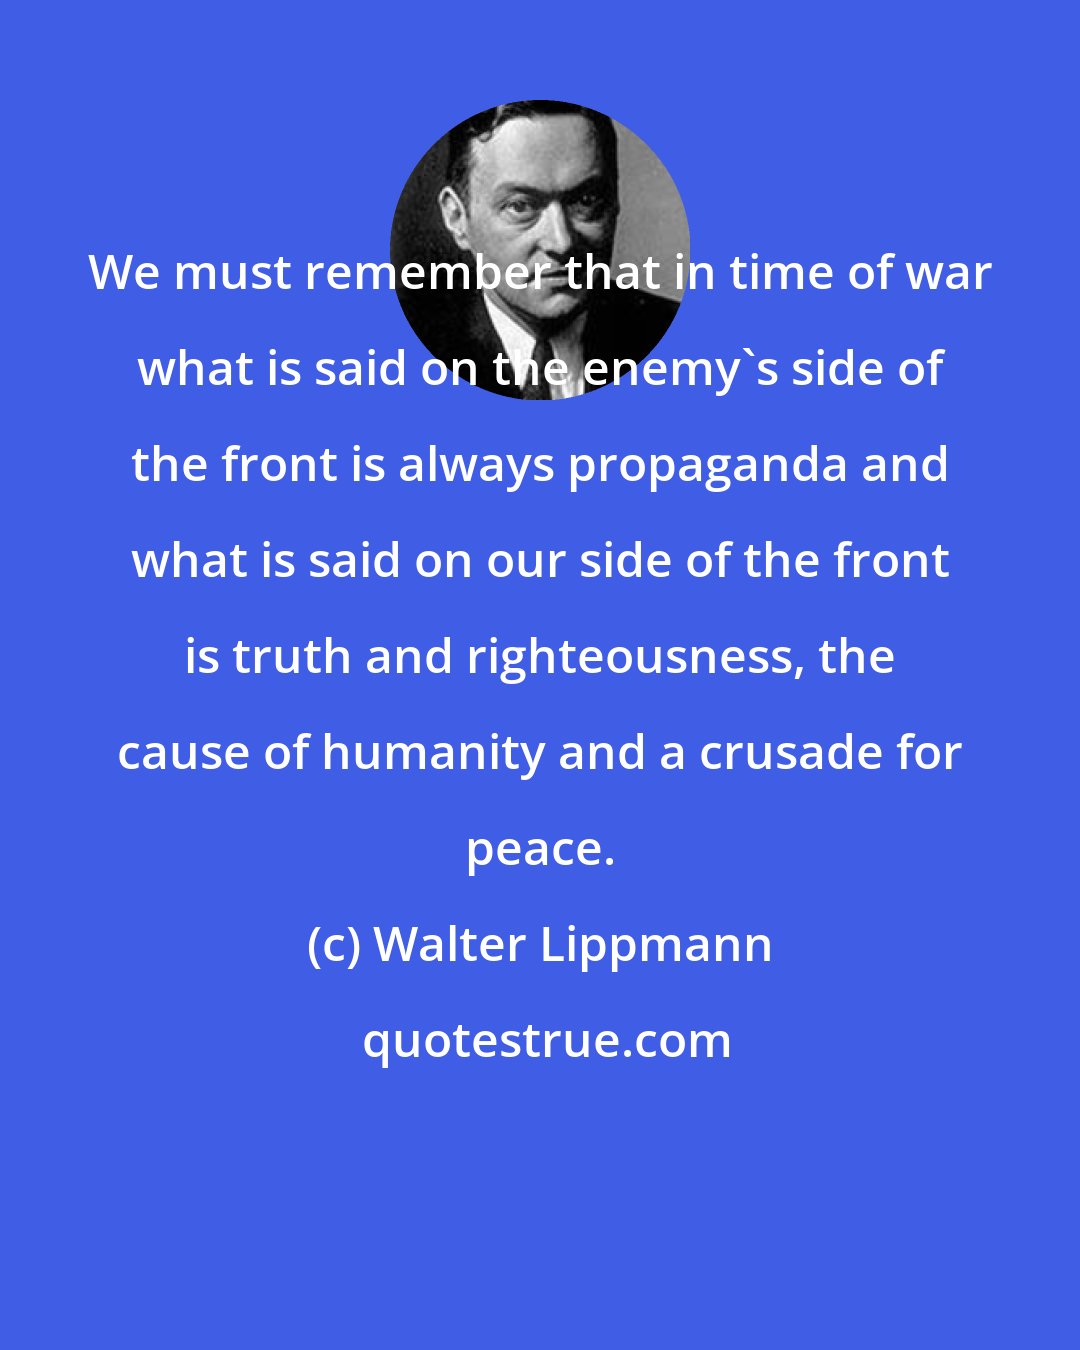 Walter Lippmann: We must remember that in time of war what is said on the enemy's side of the front is always propaganda and what is said on our side of the front is truth and righteousness, the cause of humanity and a crusade for peace.